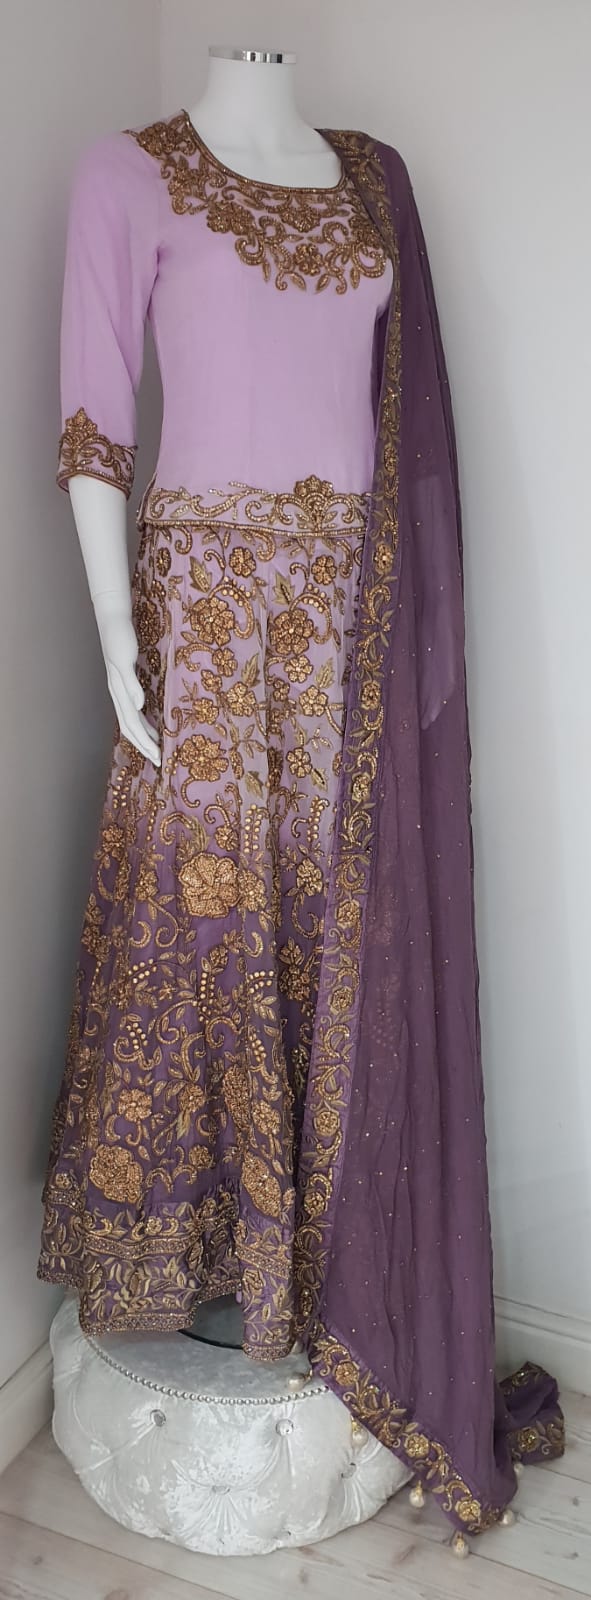 Purple wedding langha with gold embroidery